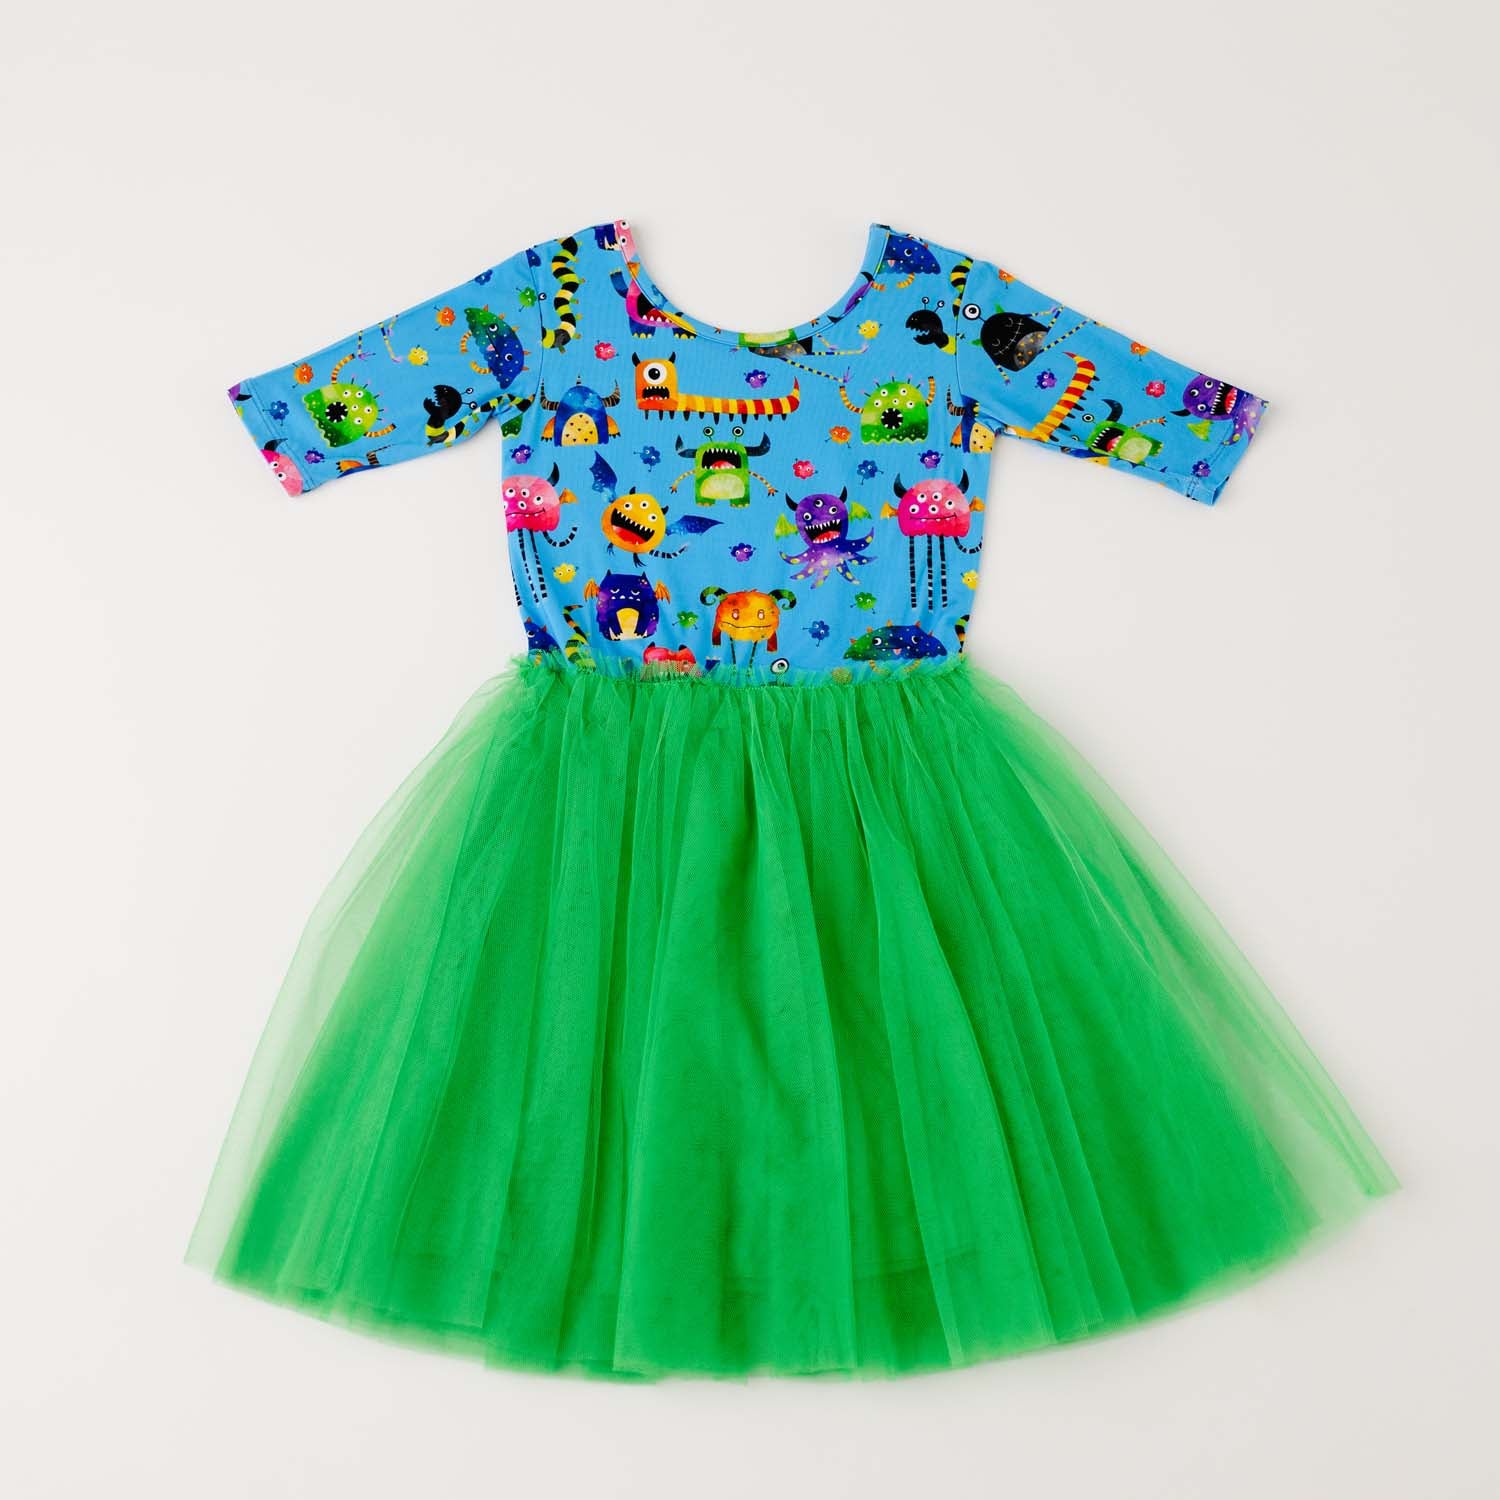 Cole's Spooky Monsters 2022 Half Sleeve Party Dress